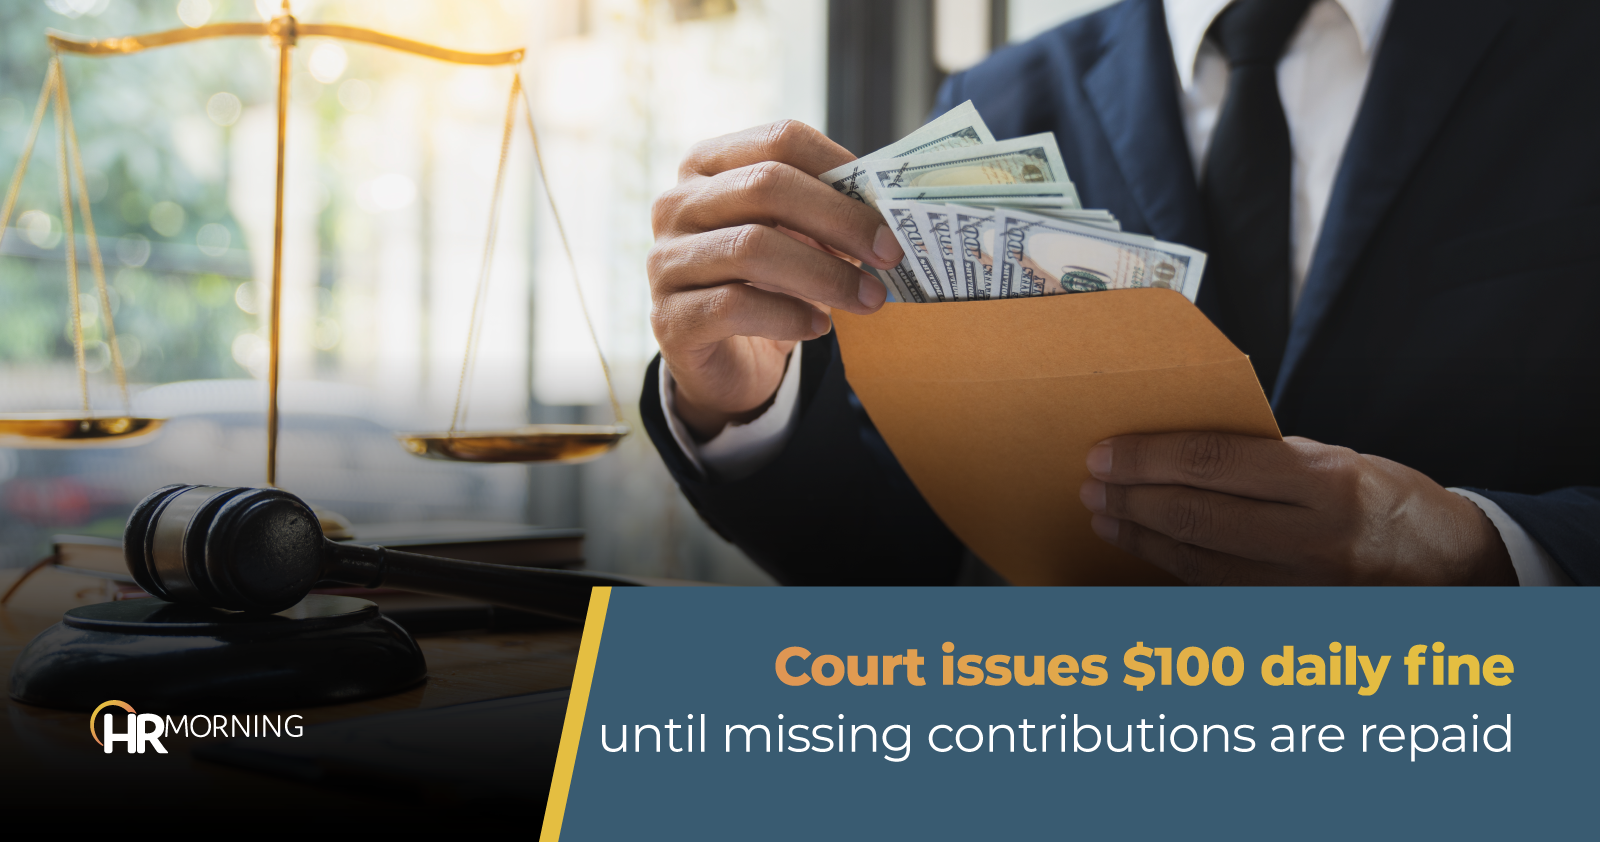 Court issues $100 daily fine until missing contributions are repaid